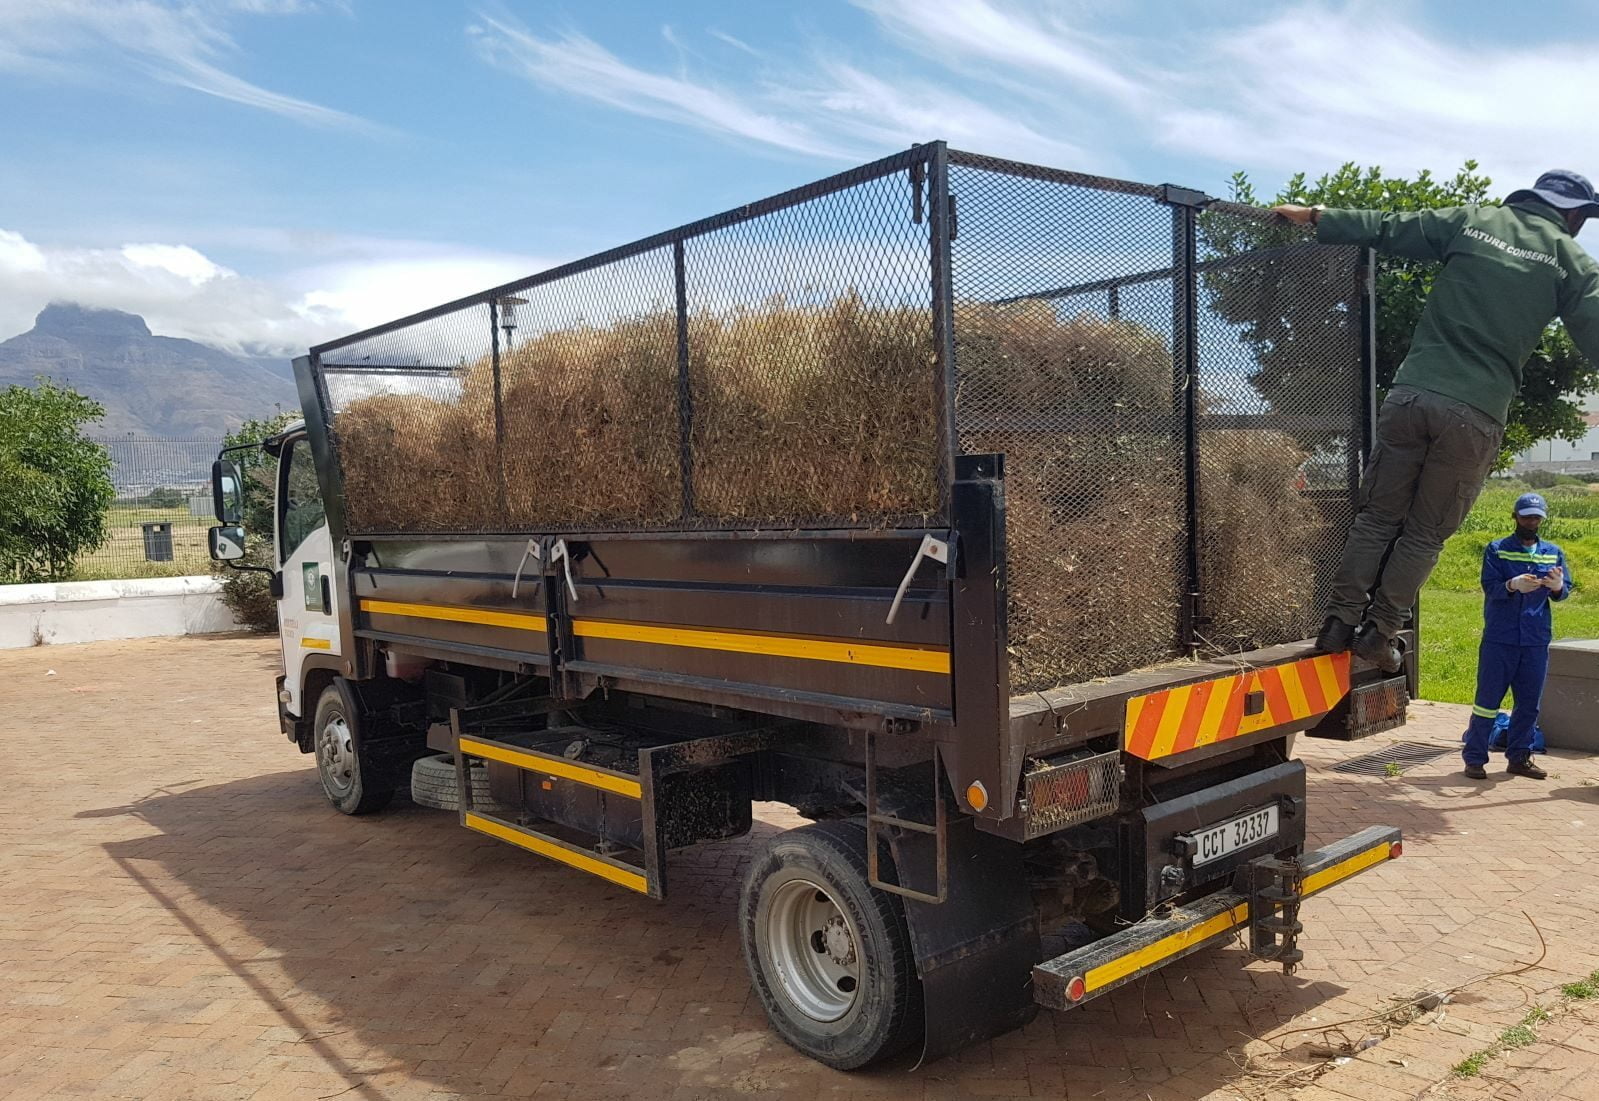 A truck load of mostly vetch (680kg) readied to be dispacthed from the reserve